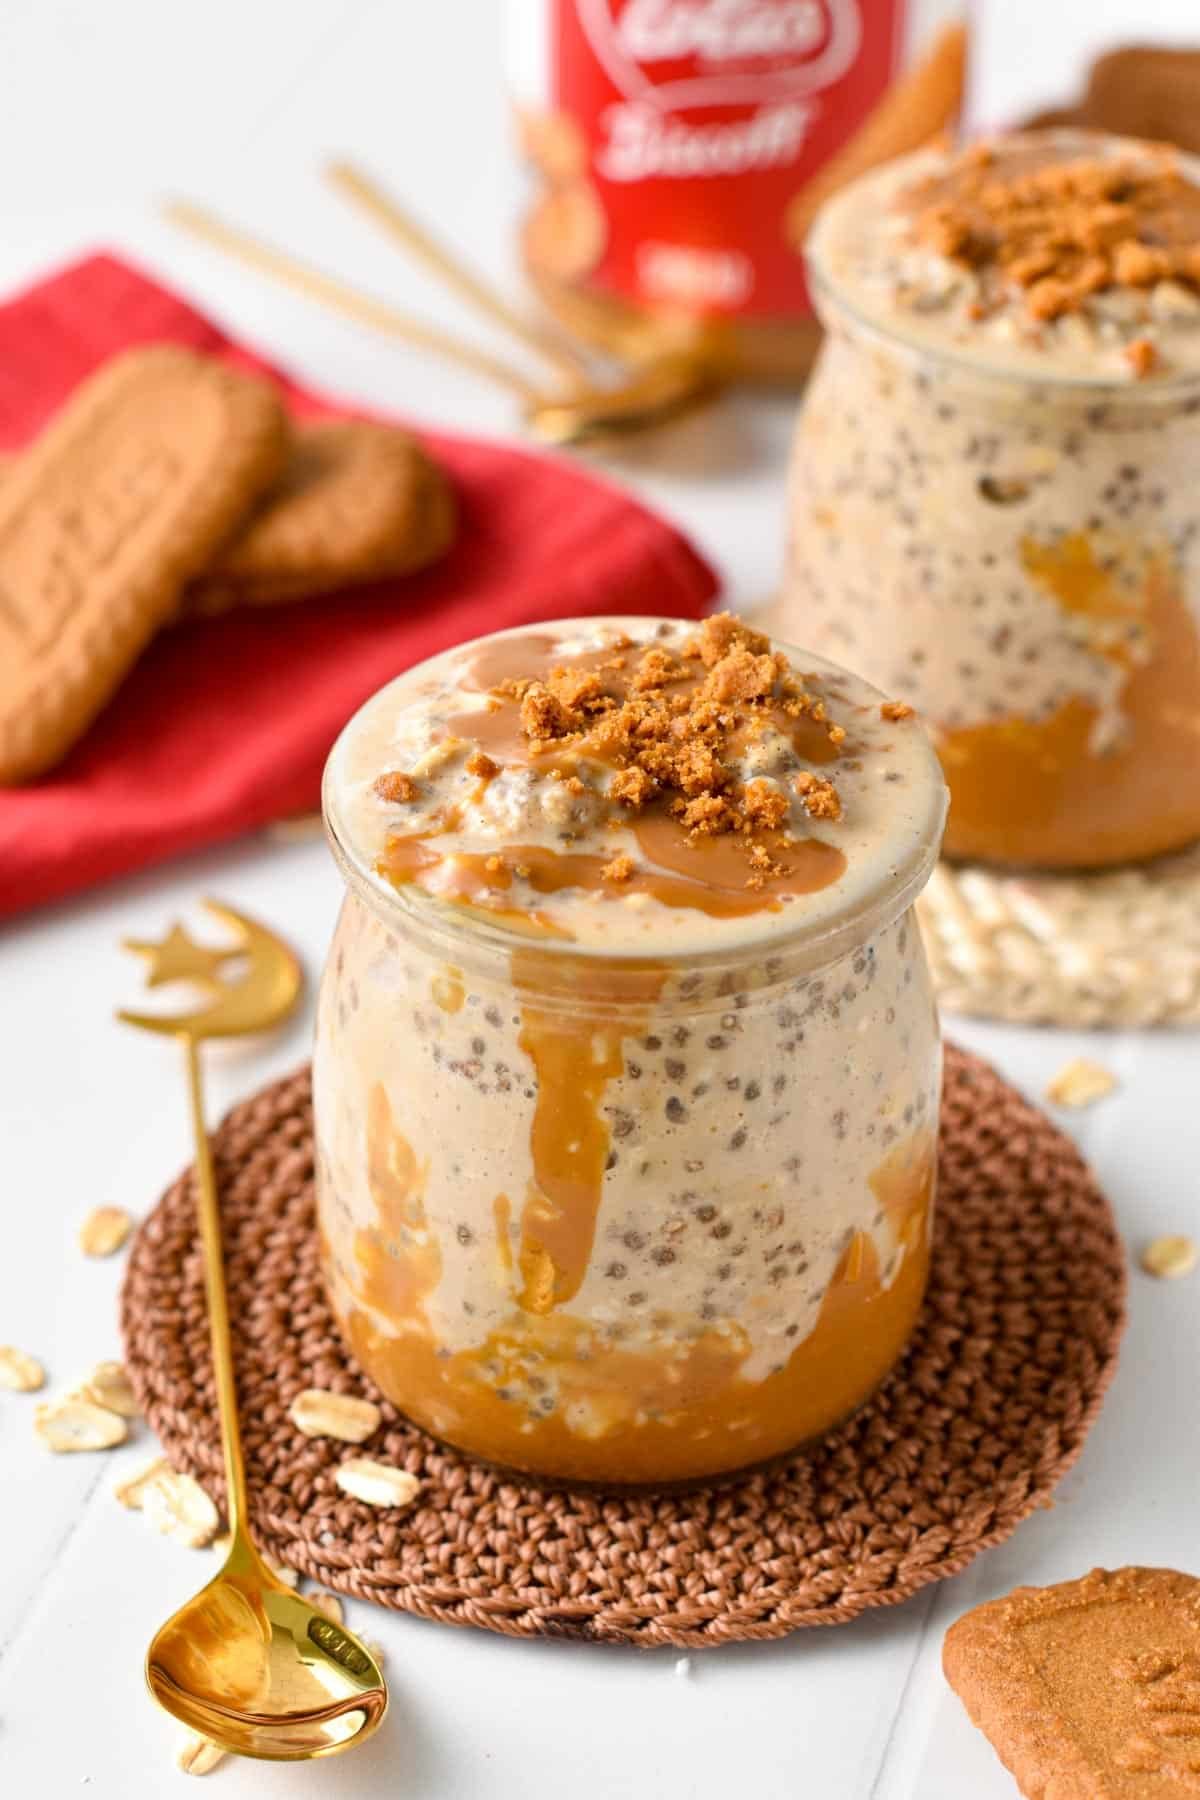 This Biscoff Overnight Oats recipe is the most deliciously creamy, cinnamon-flavored oats breakfast, If you love anything biscoff, from the spread to biscuits, this easy breakfast is for you.